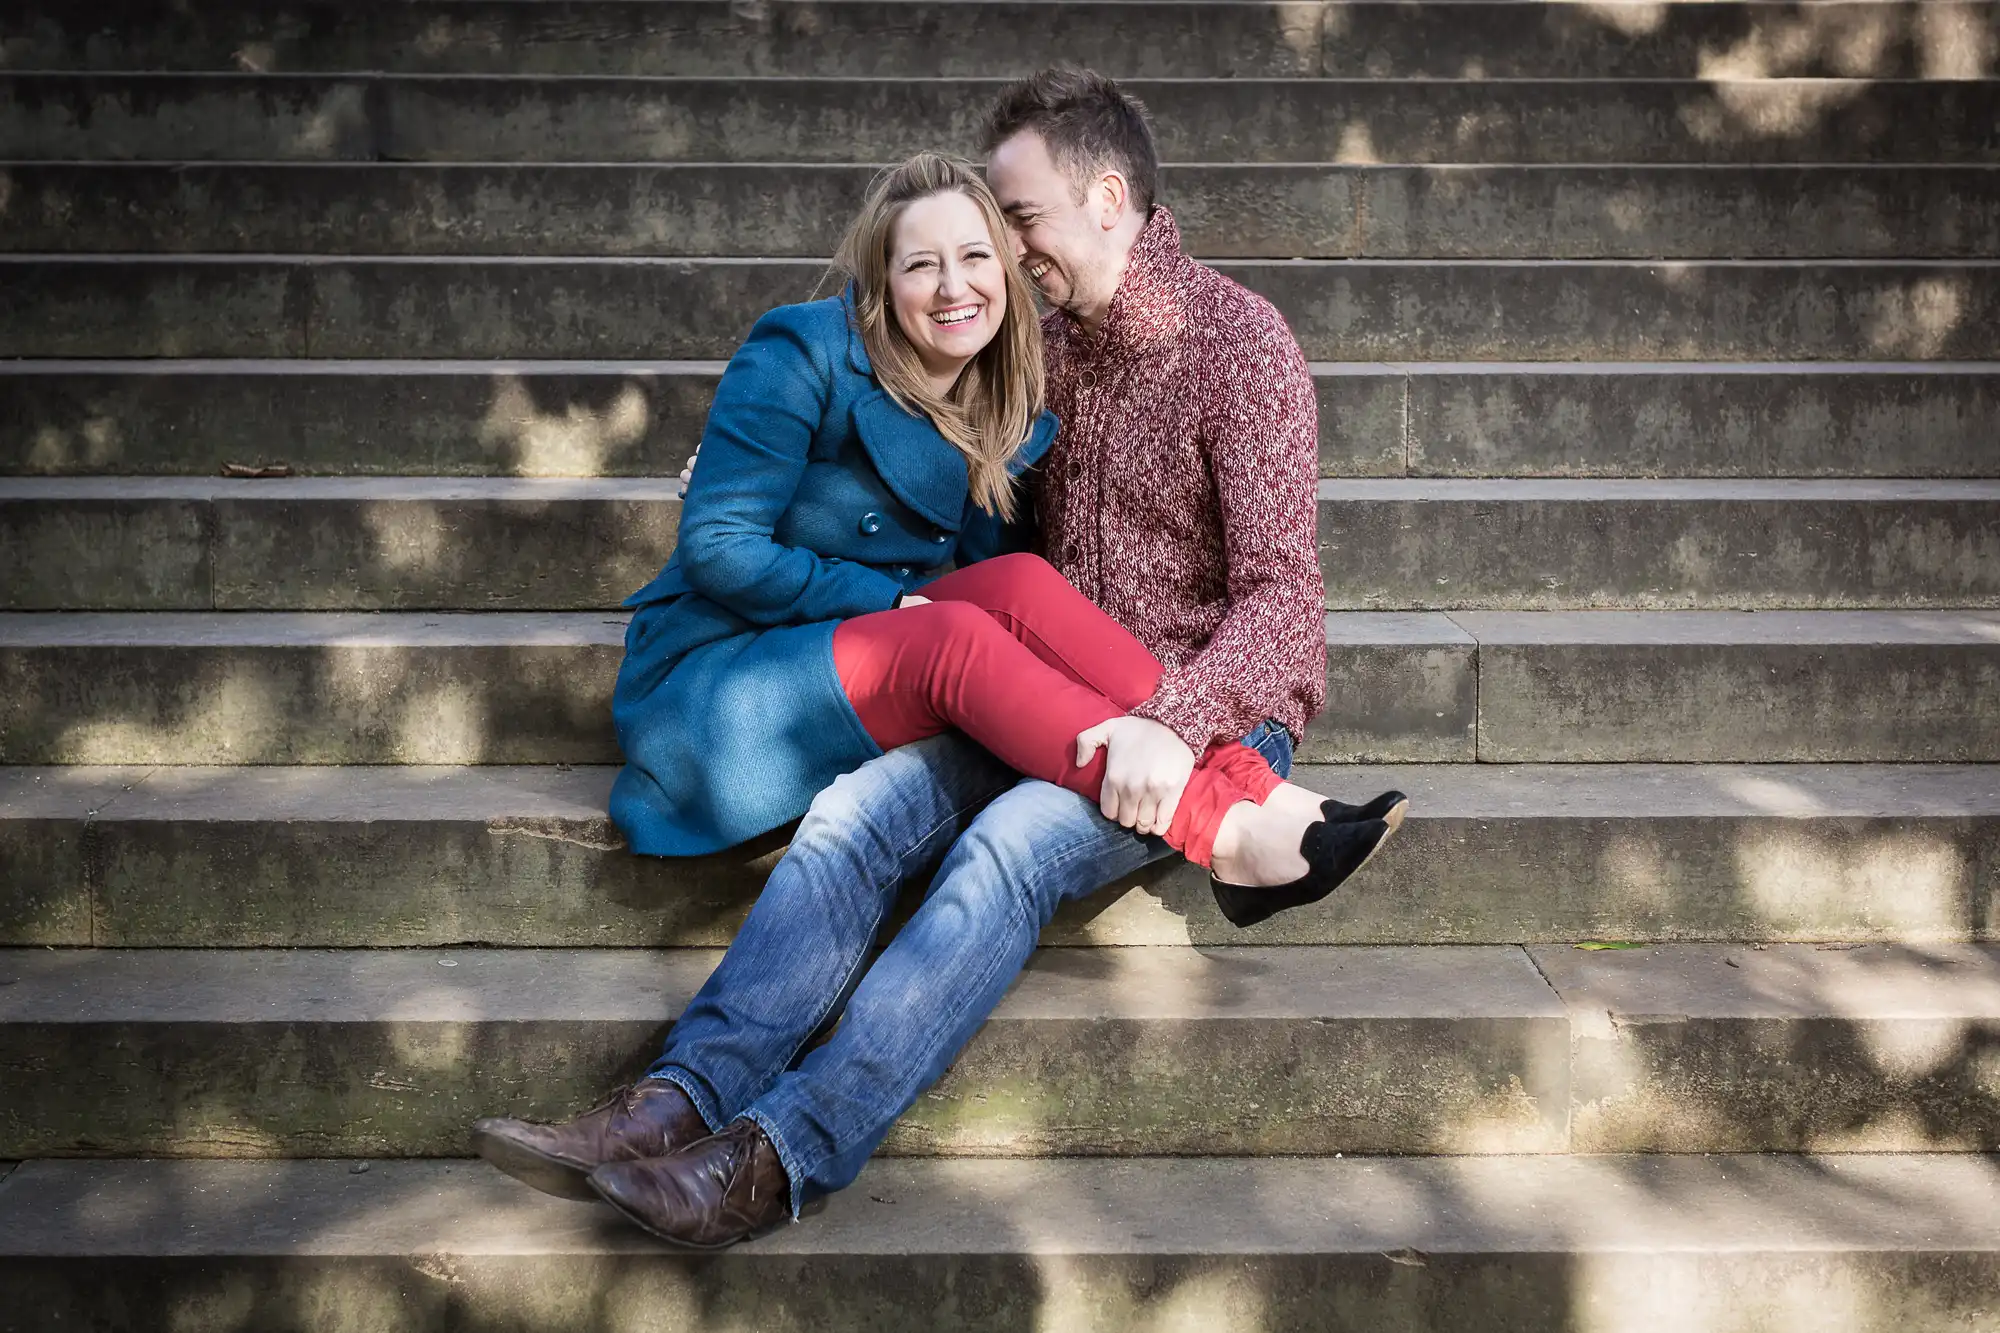 A joyful couple sitting closely and laughing on stone steps, with the man holding a woman's bare foot. she is wearing a blue coat and red pants; he is in a patterned shirt and jeans.